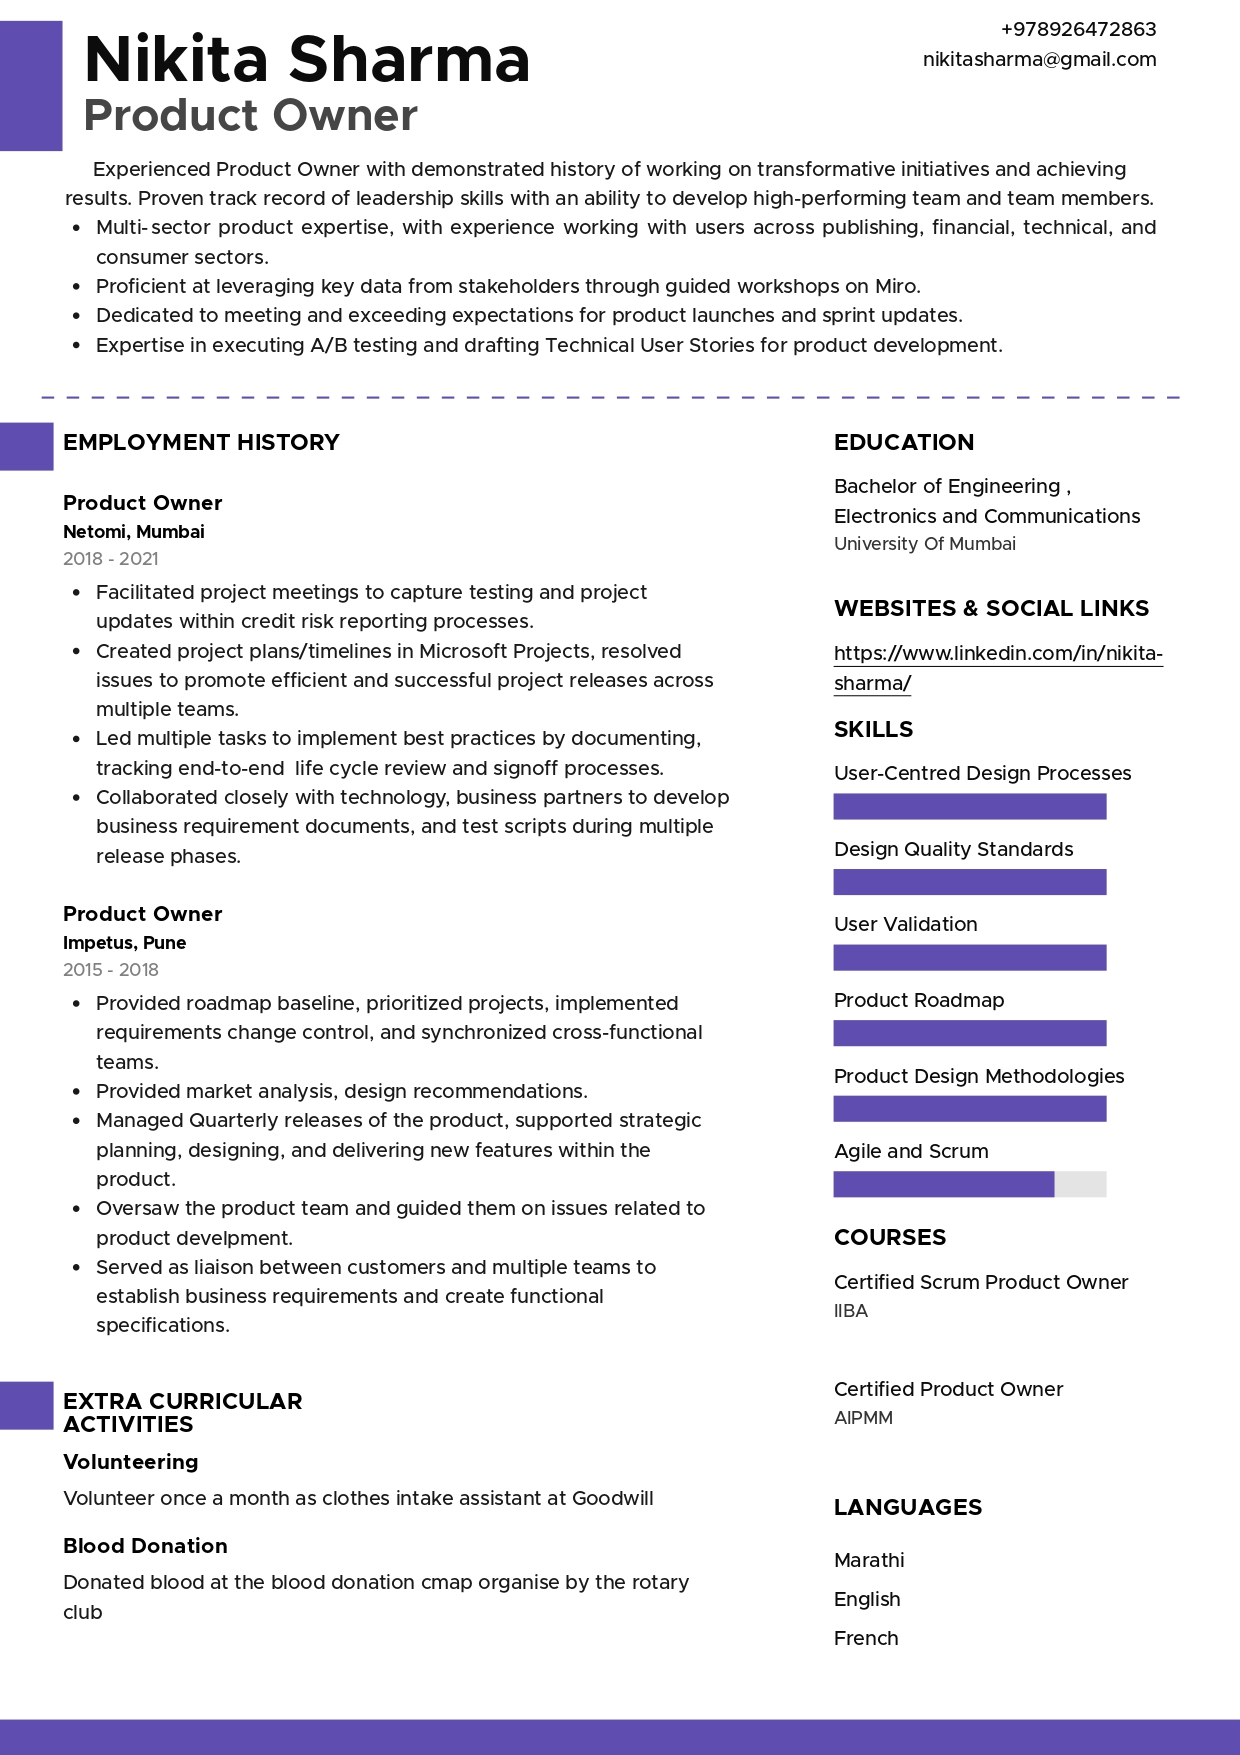 Resume of Product Owner